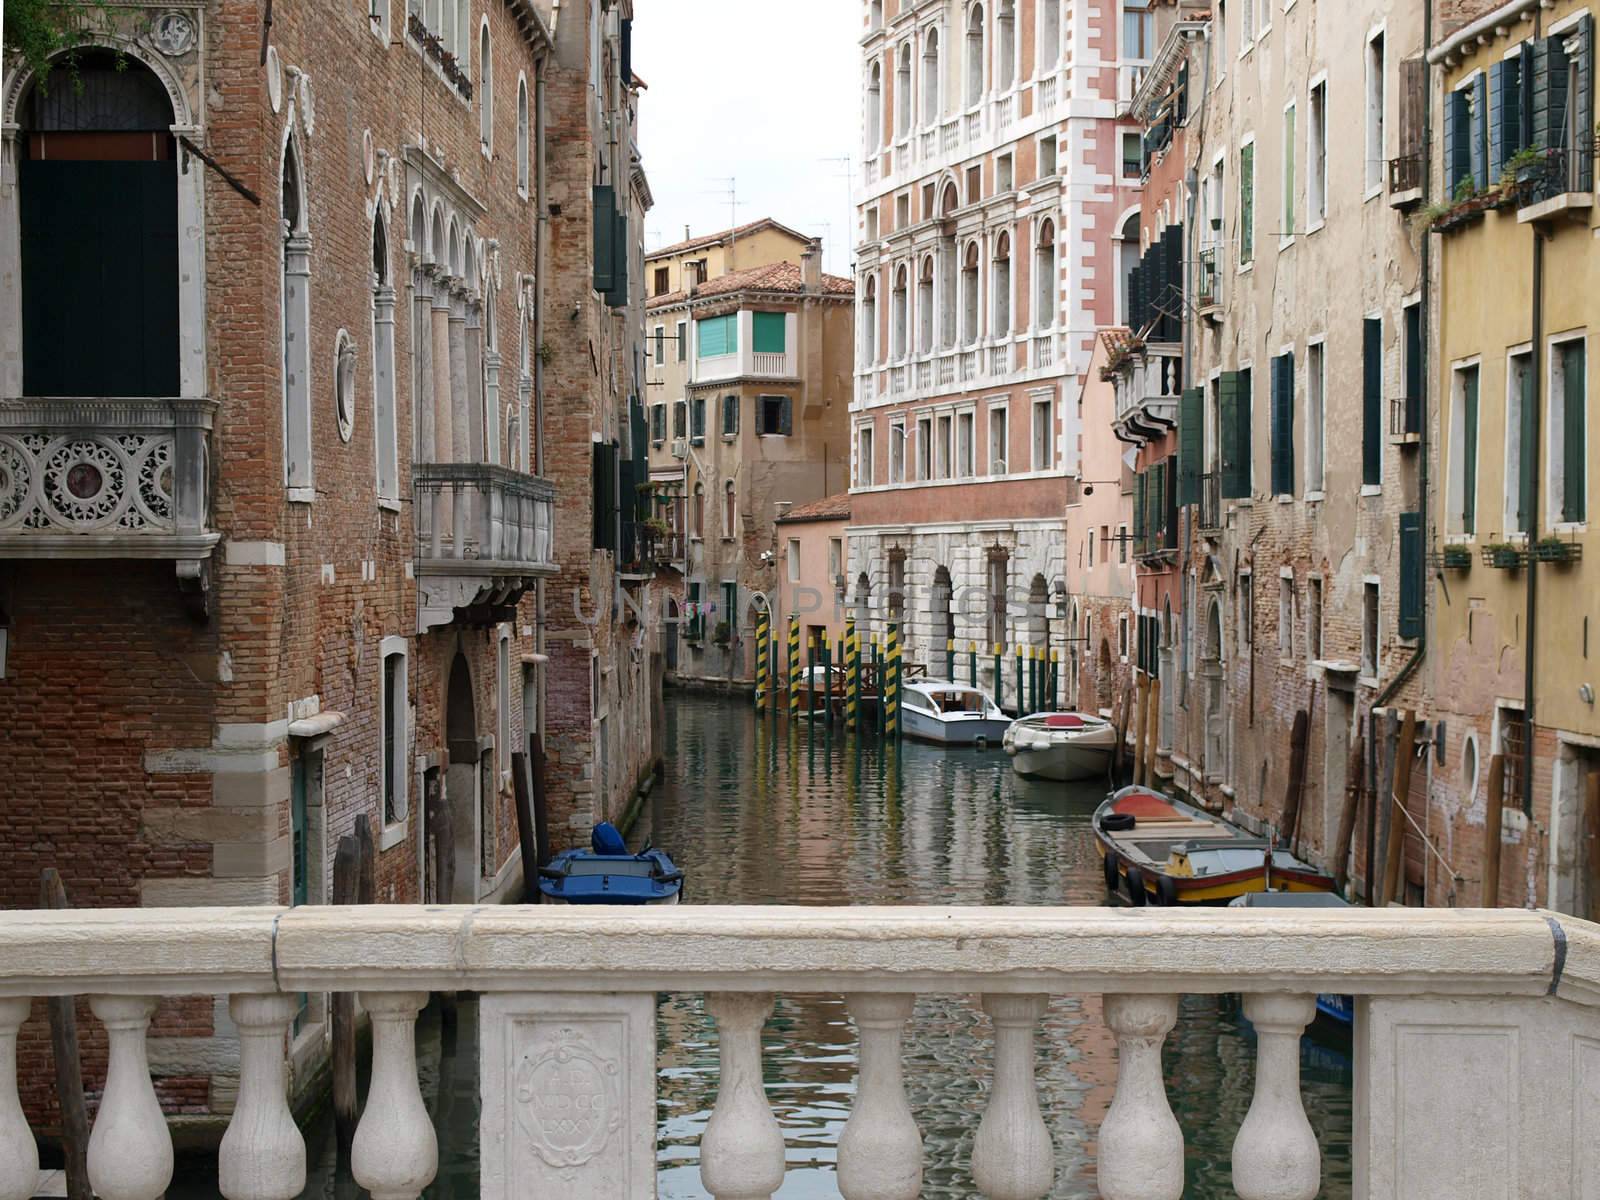  Venice - Typical Venetian scene with houses and narrow canal. 